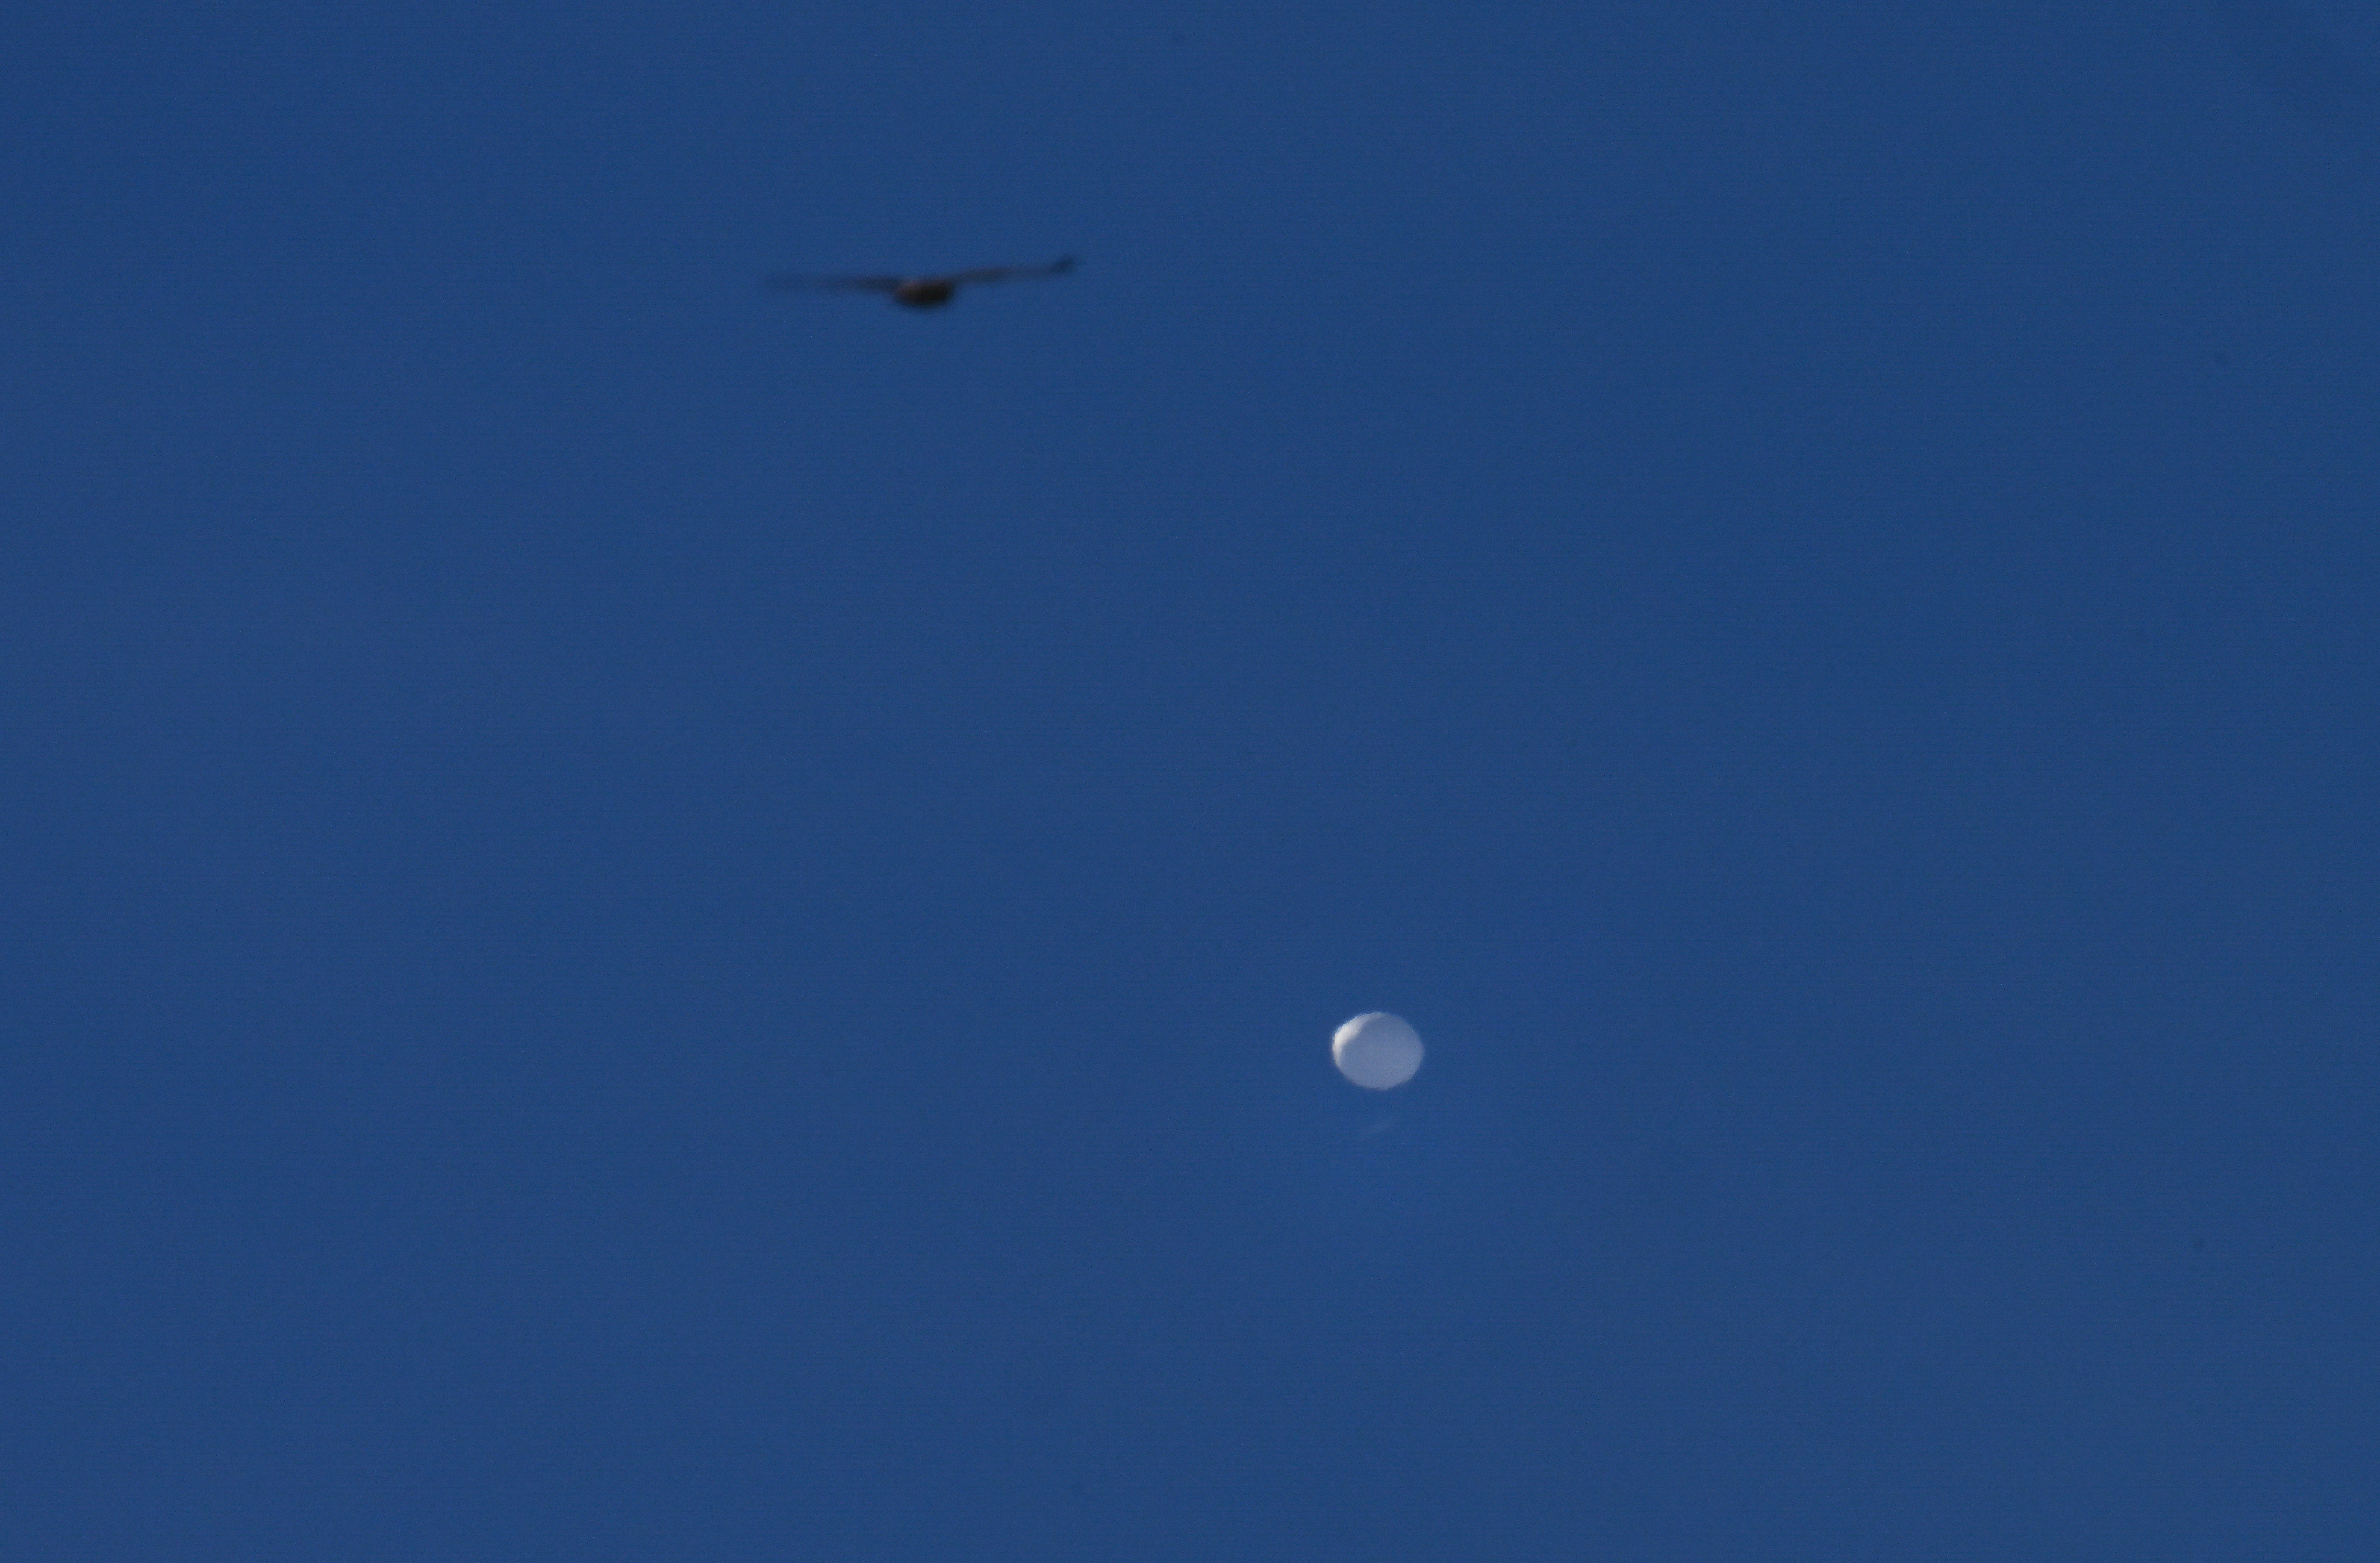 A photo of a white balloon in a blue sky, with a black bird flying.